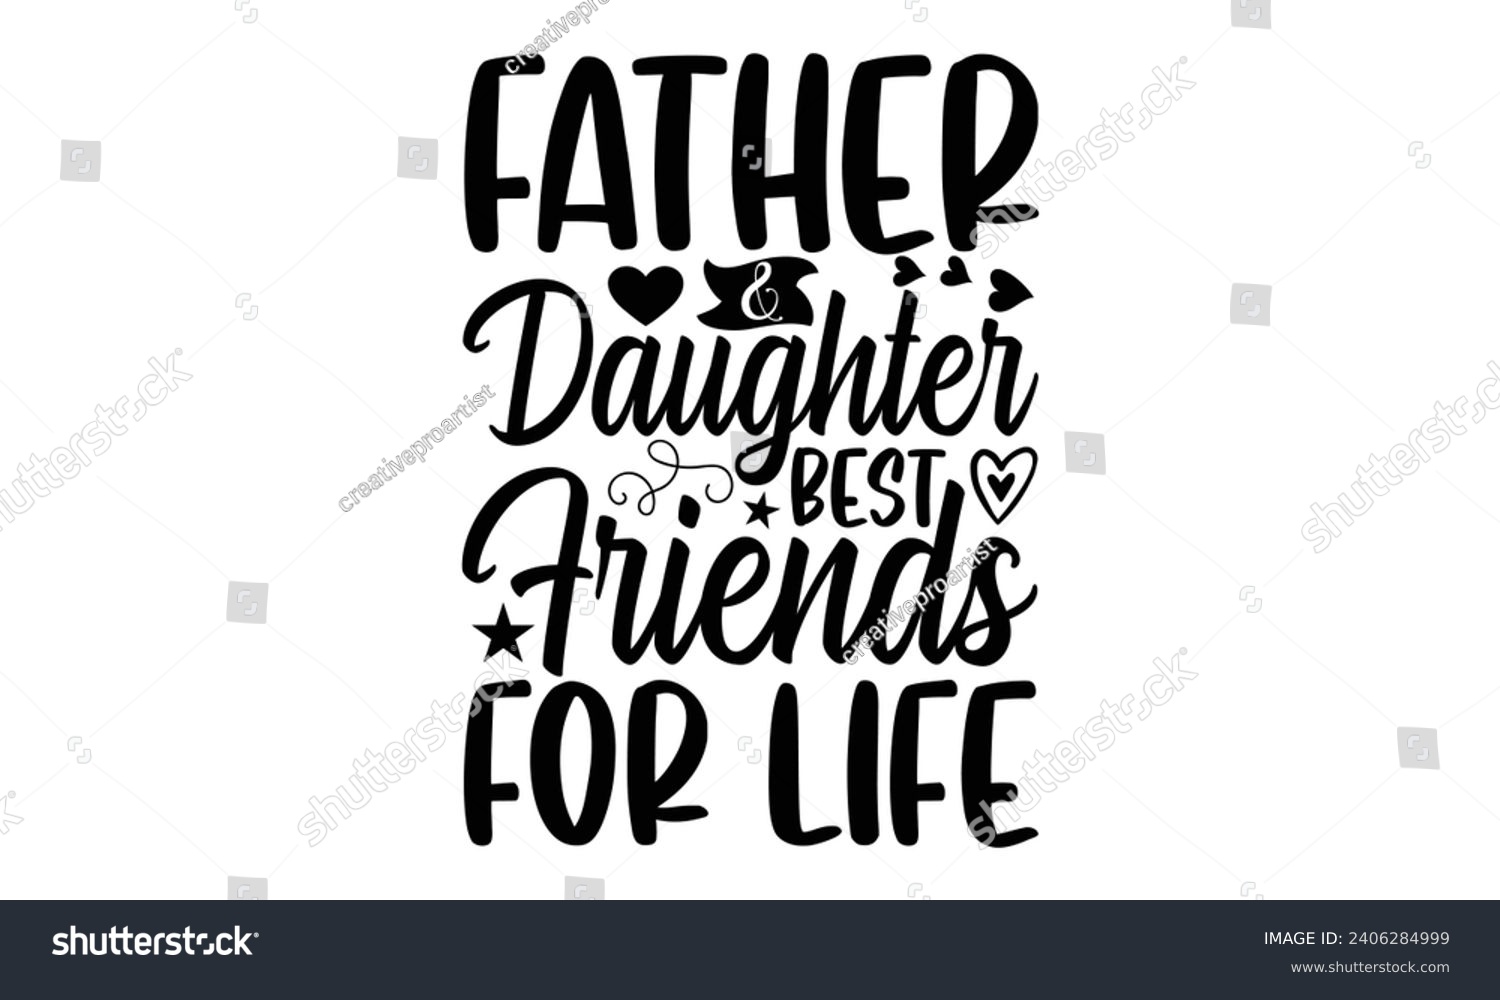 SVG of Father  Daughter Best Friends For Life- Best friends t- shirt design, Hand drawn lettering phrase, Illustration for prints on bags, posters, cards eps, Files for Cutting, Isolated on white background svg